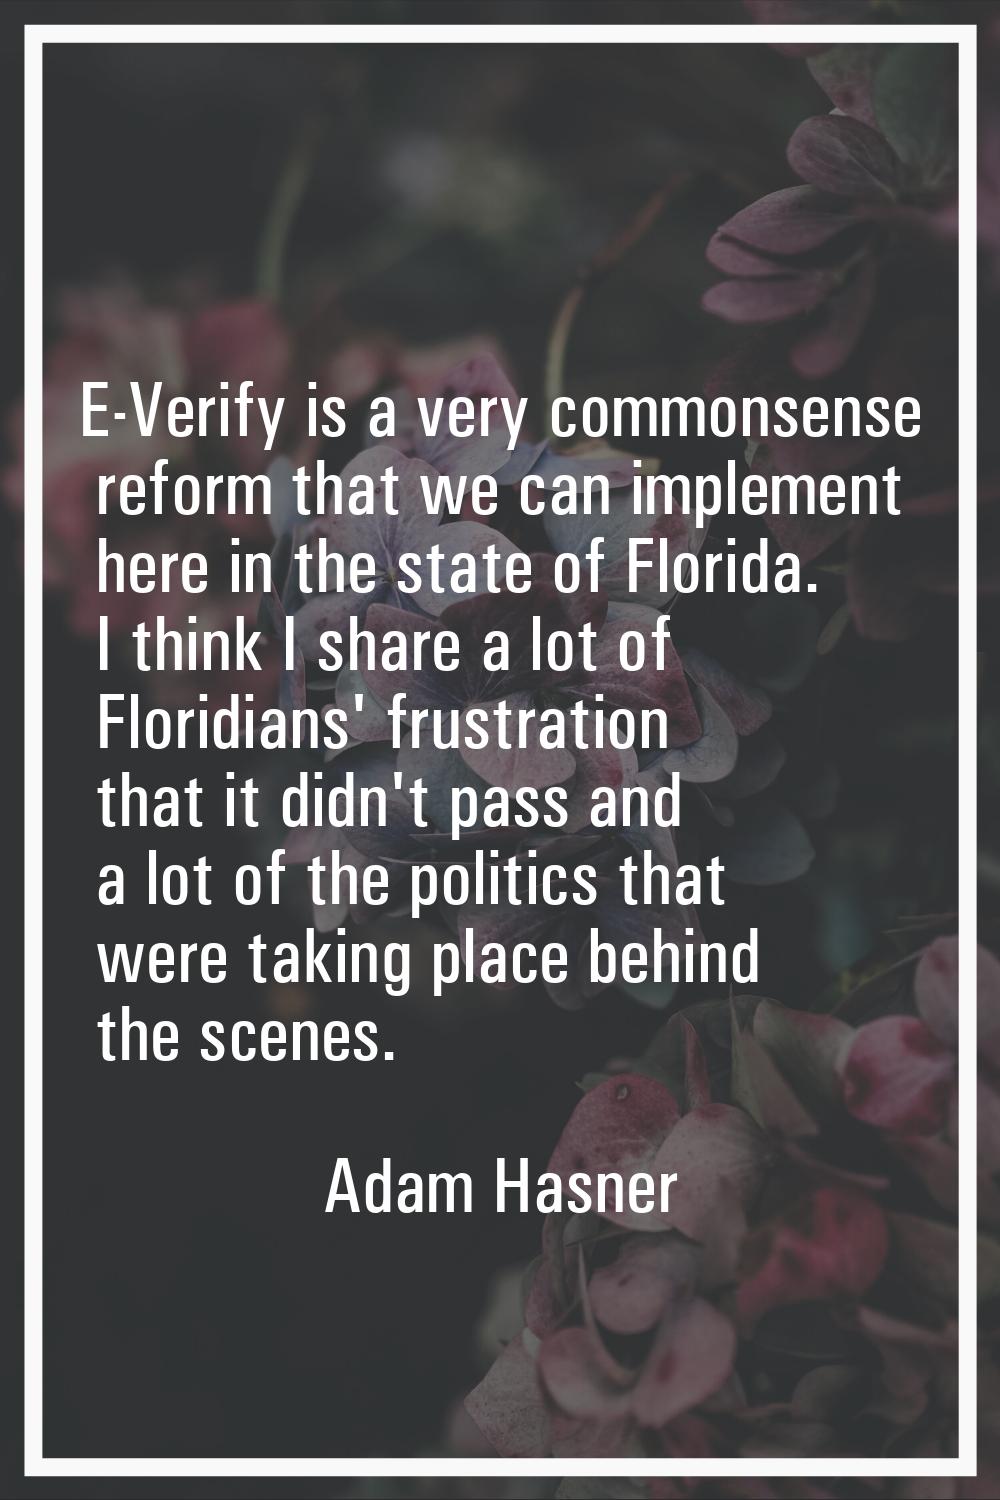 E-Verify is a very commonsense reform that we can implement here in the state of Florida. I think I